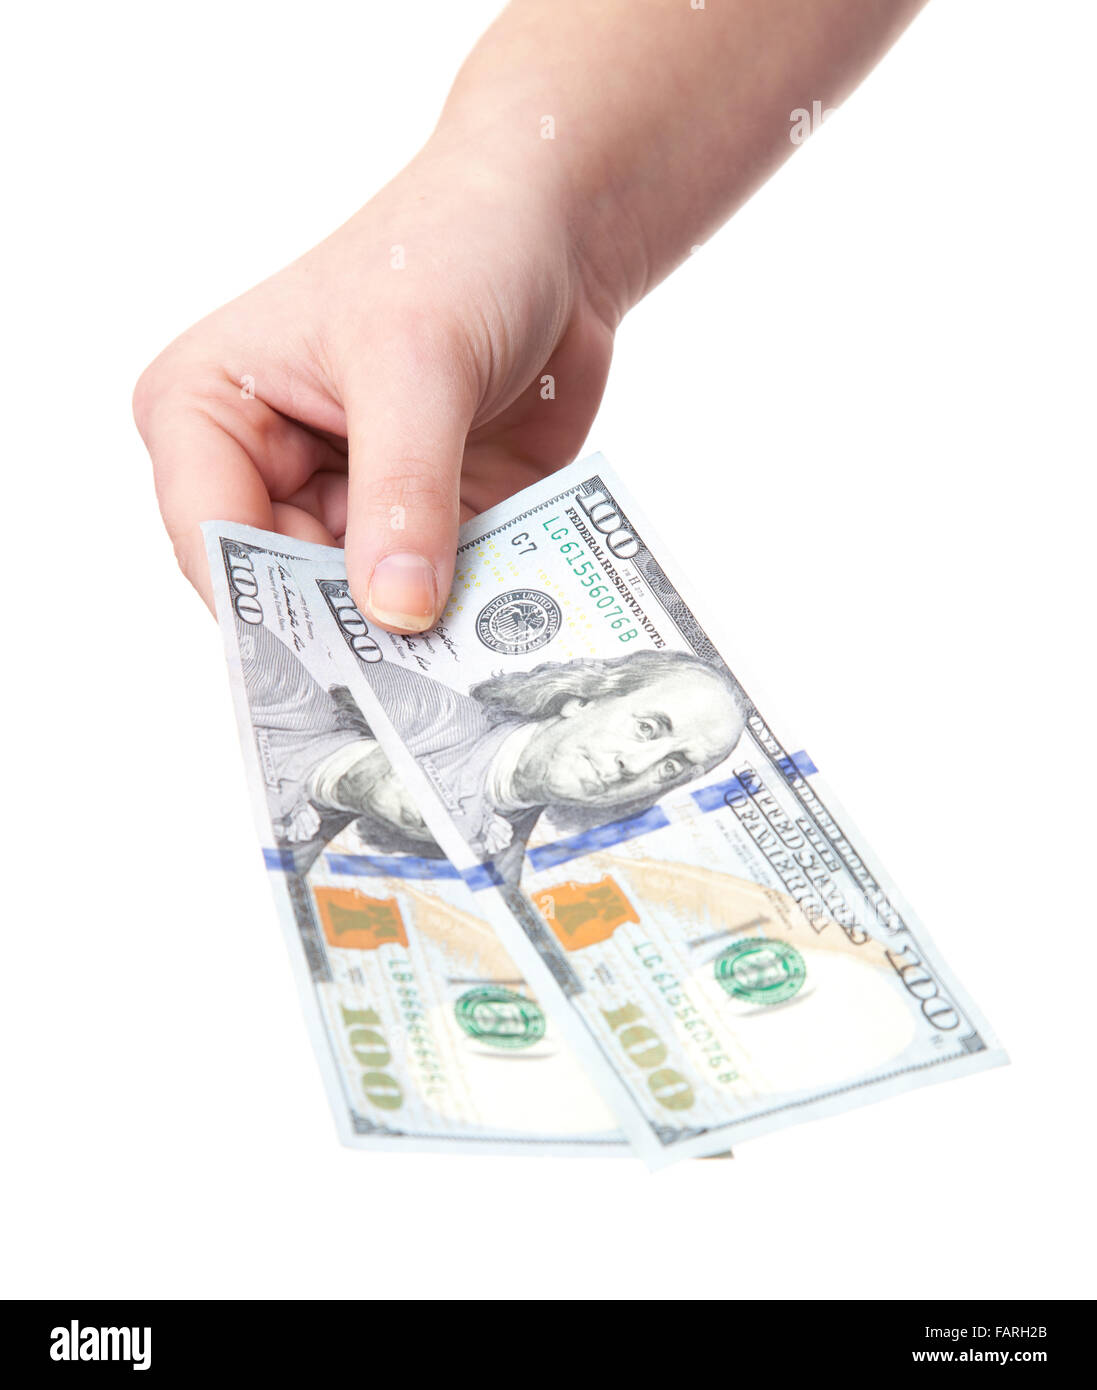 Hand holding hundred dollar notes. All on white background. Stock Photo